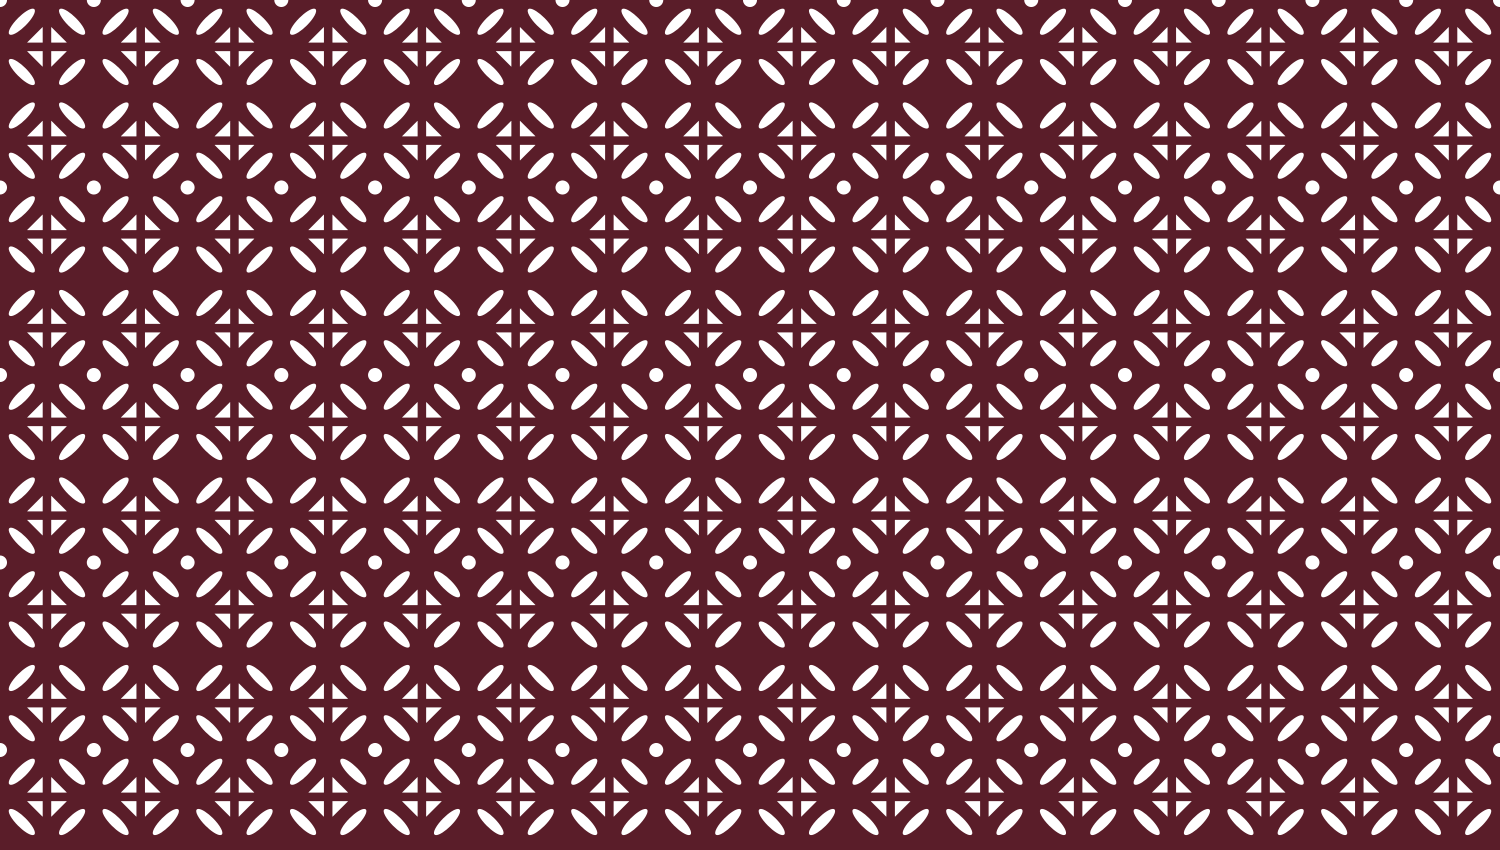 Parasoleil™ Continental Flower© pattern displayed with a burgundy color overlay